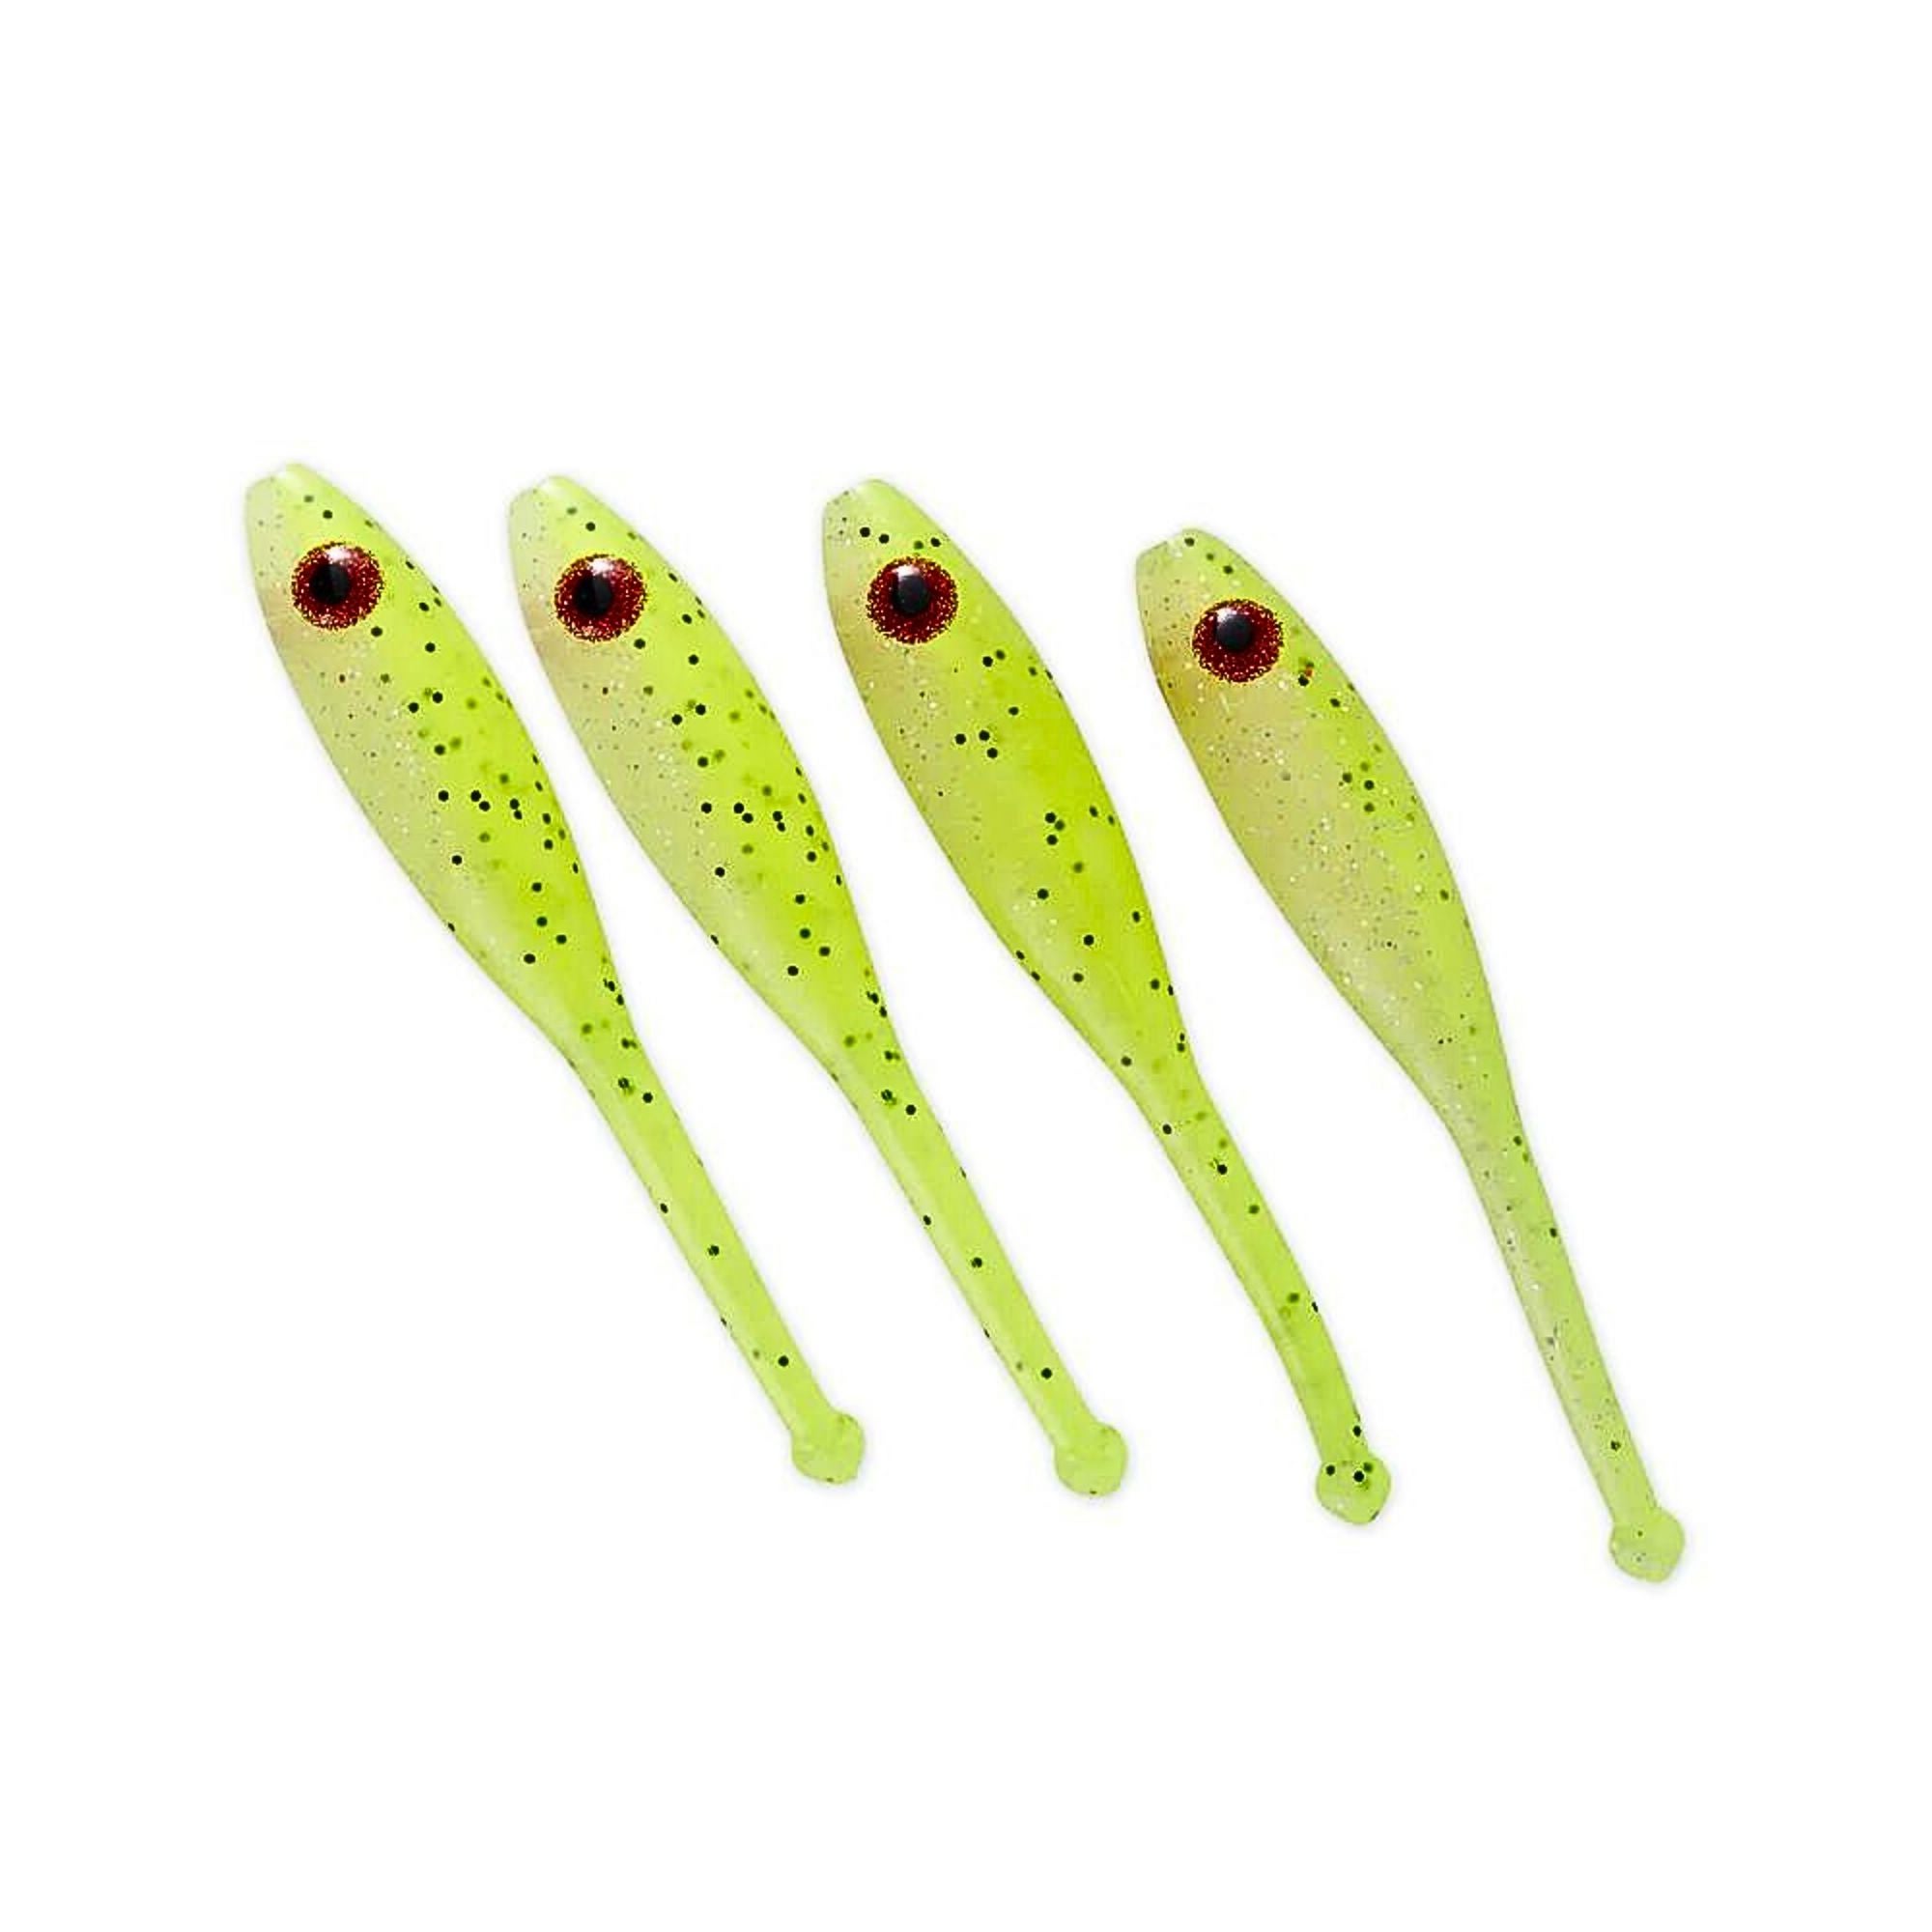 The Slick Jerk Bait, Pure Flats, Lures, Tackle